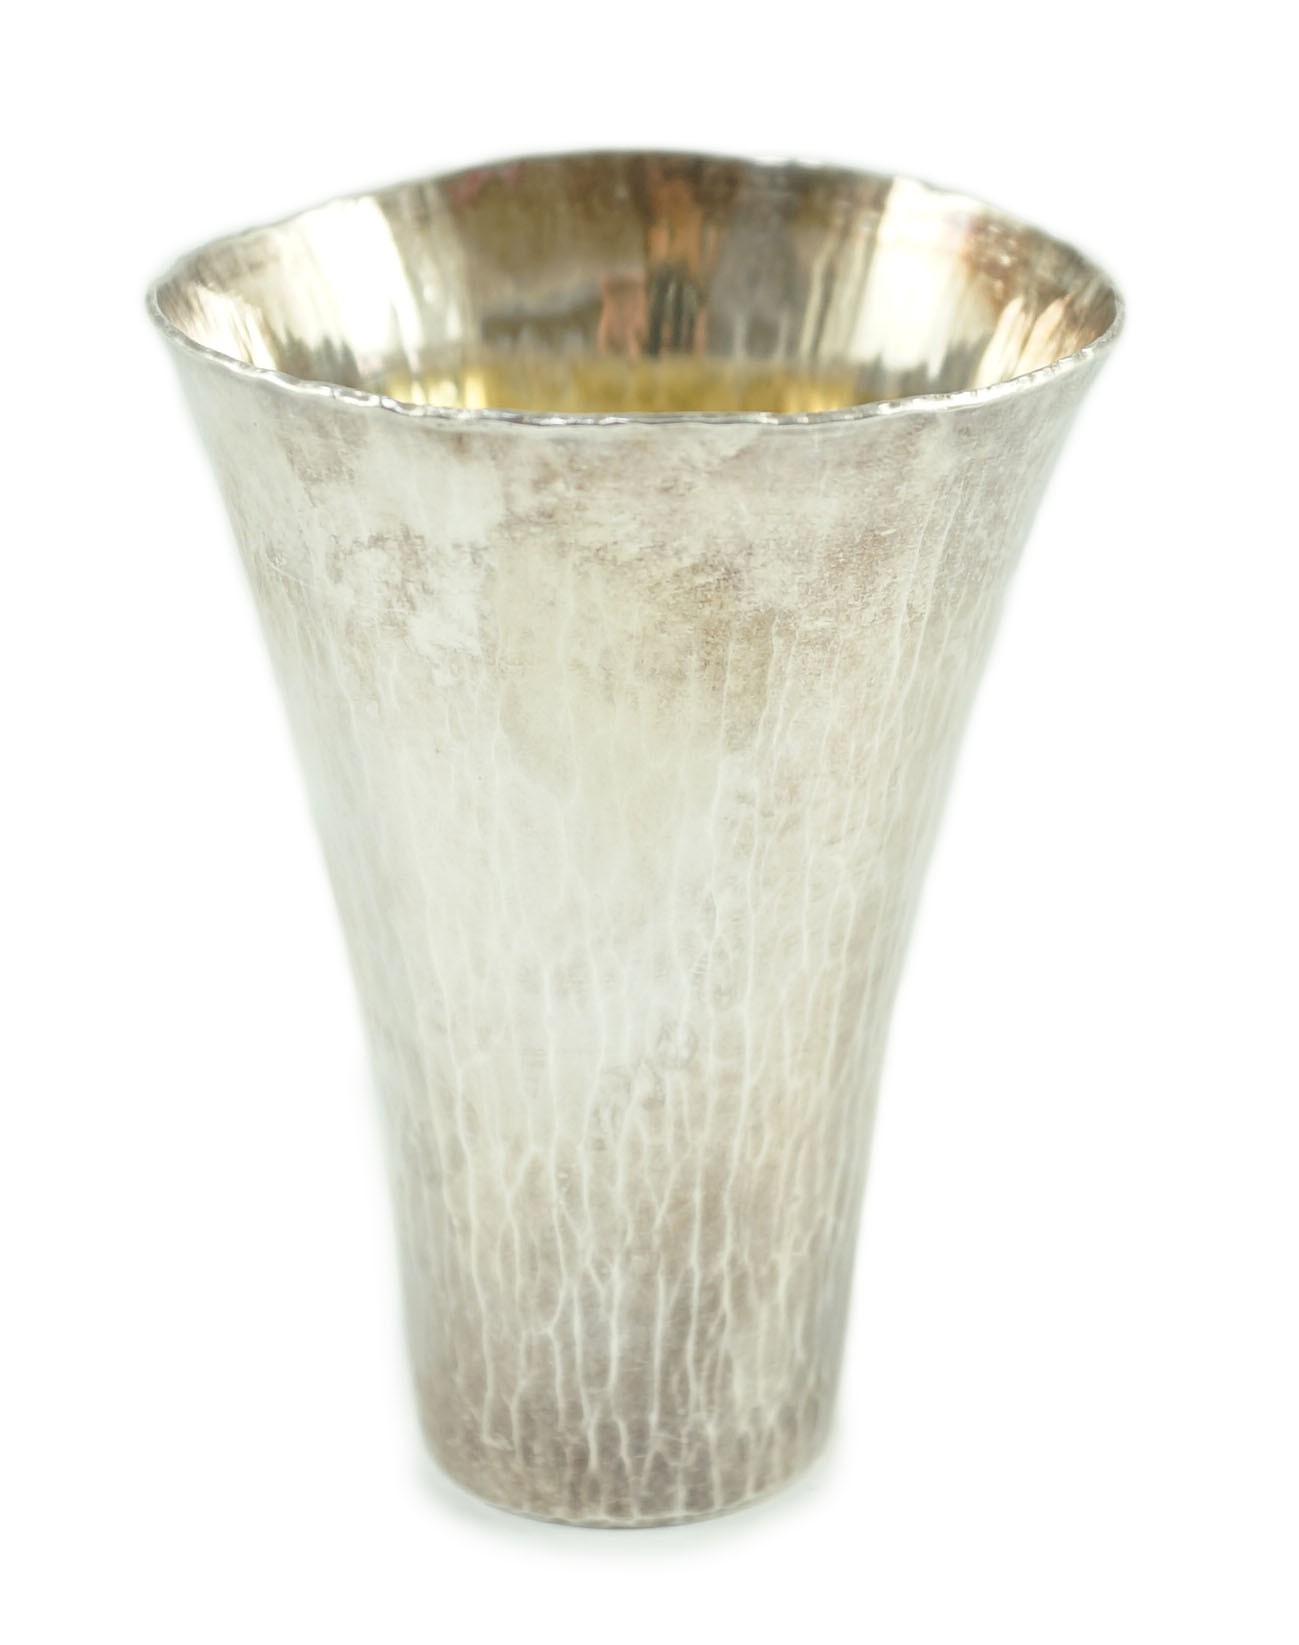 A modern Britannia standard planished silver cup, by Malcolm Appleby, of flared form, with